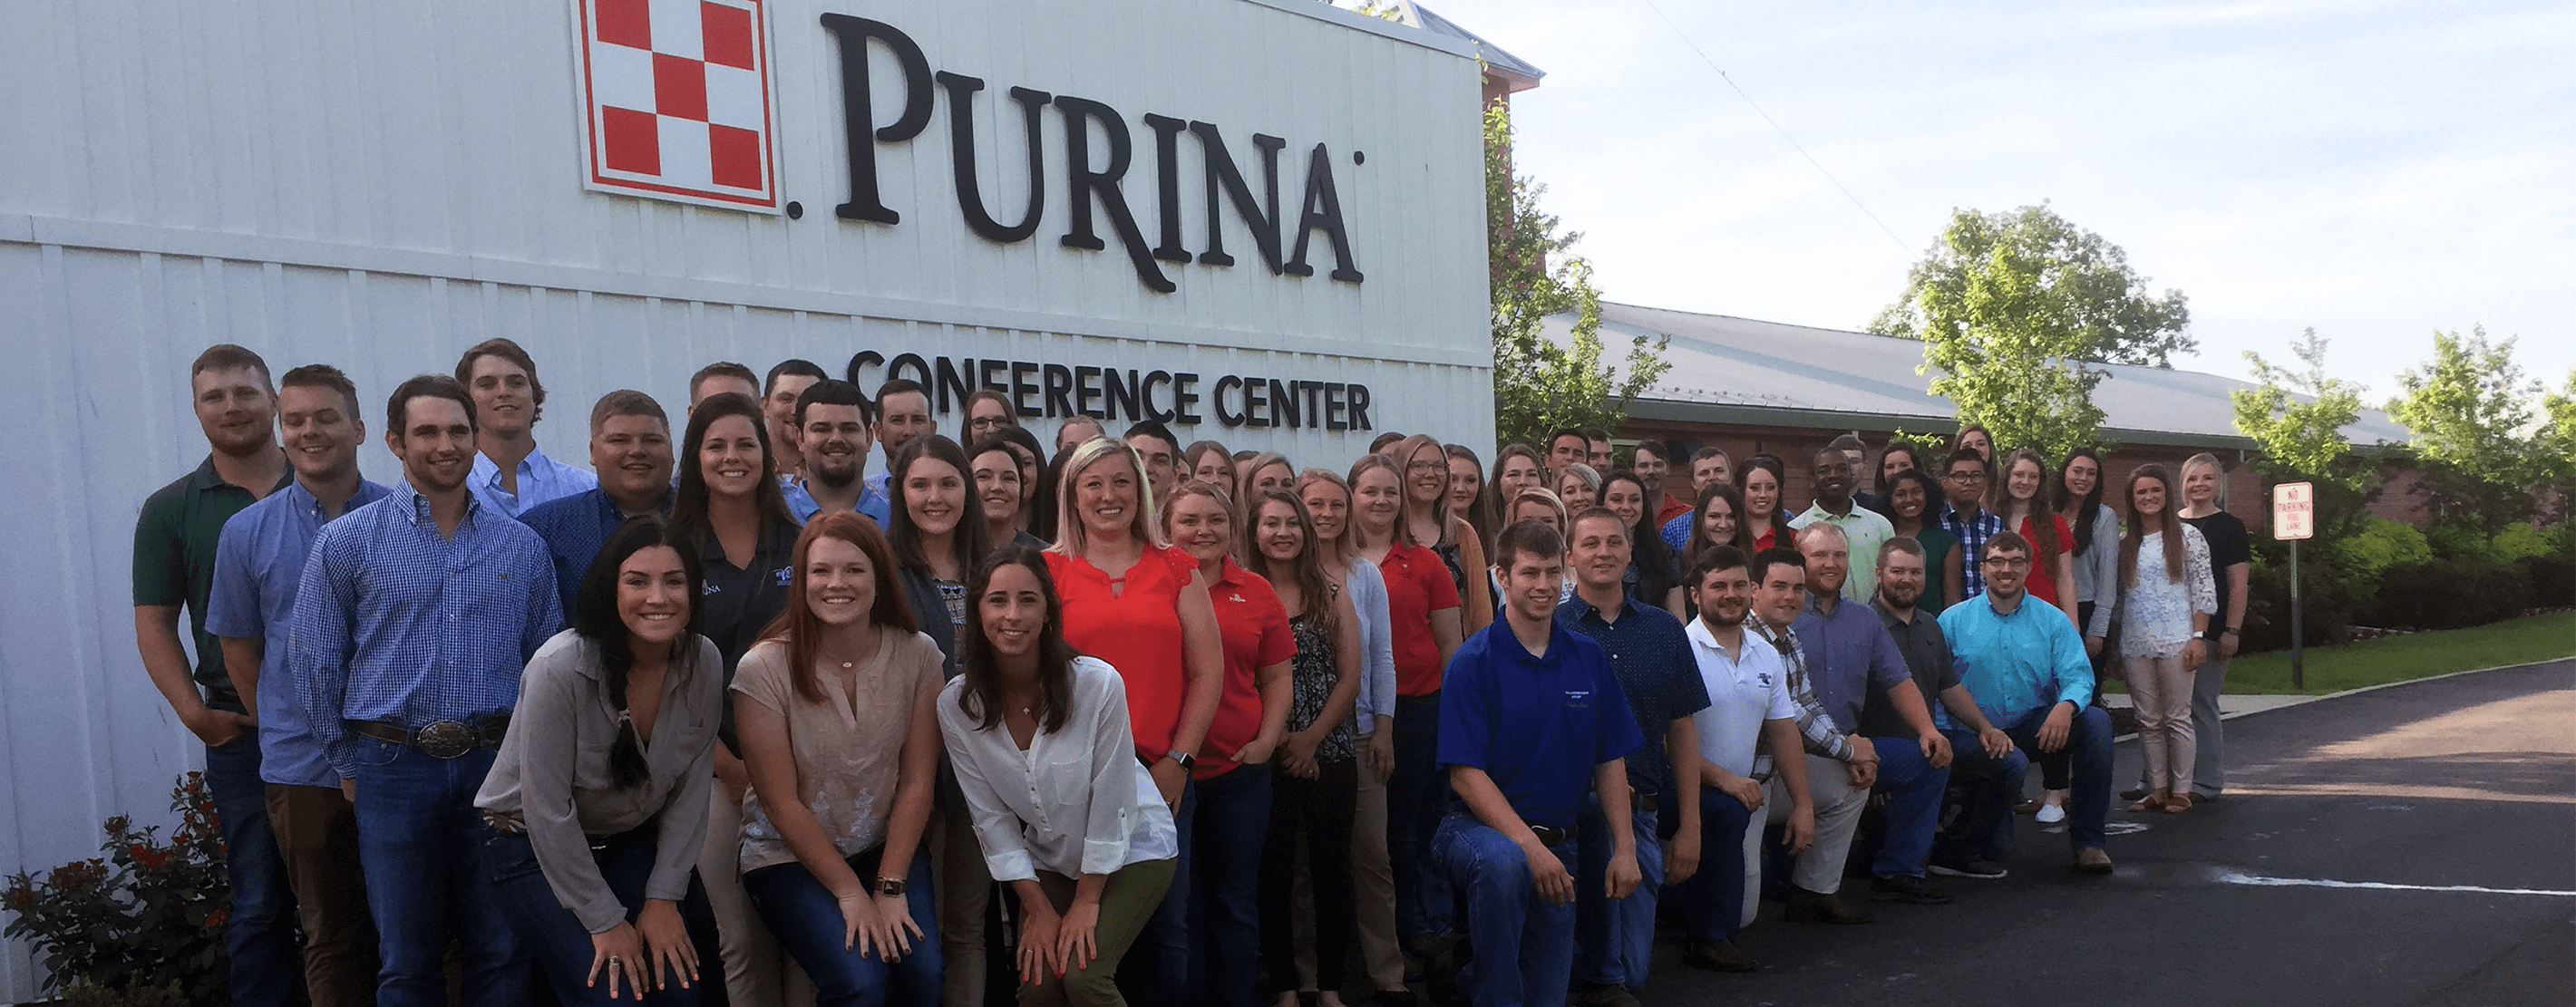 Purina Interns Posing For A Photo In Front Of A Feed Facility